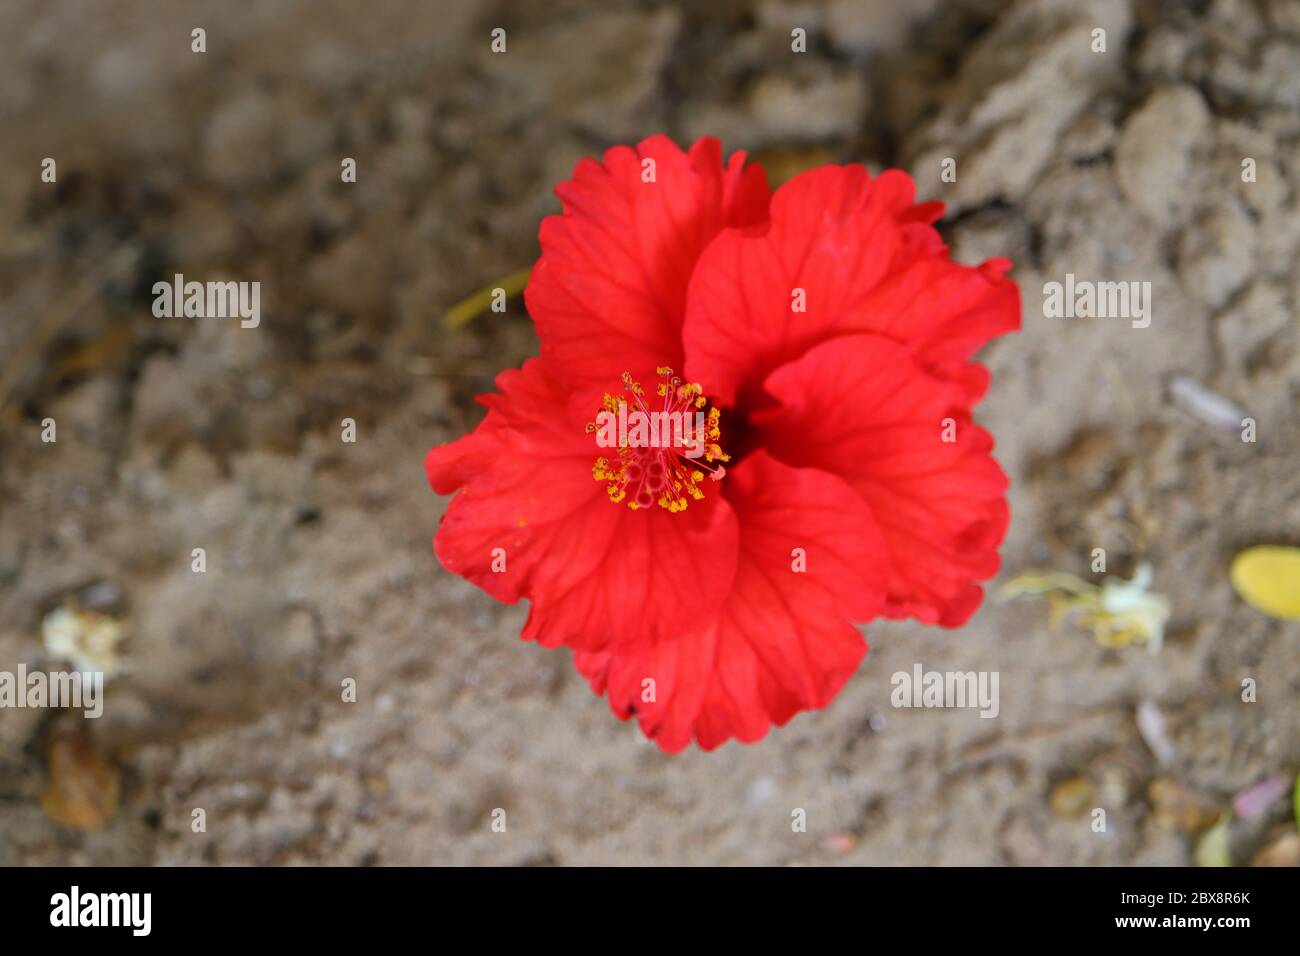 royalty free flower image ,red hibiscus flower laying on ground, hd image Stock Photo